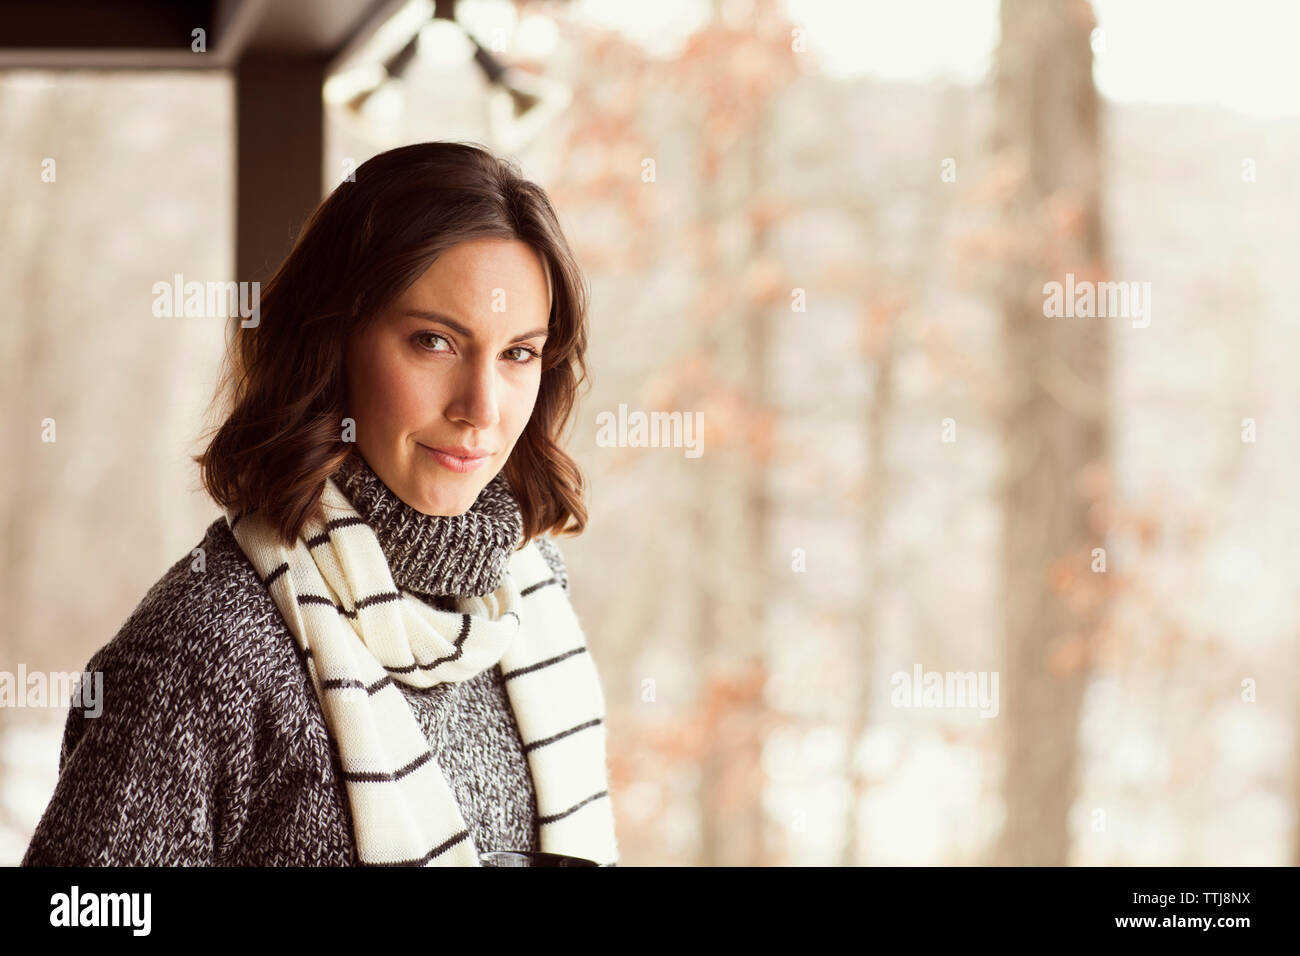 Portrait of confident woman in warm clothing Stock Photo